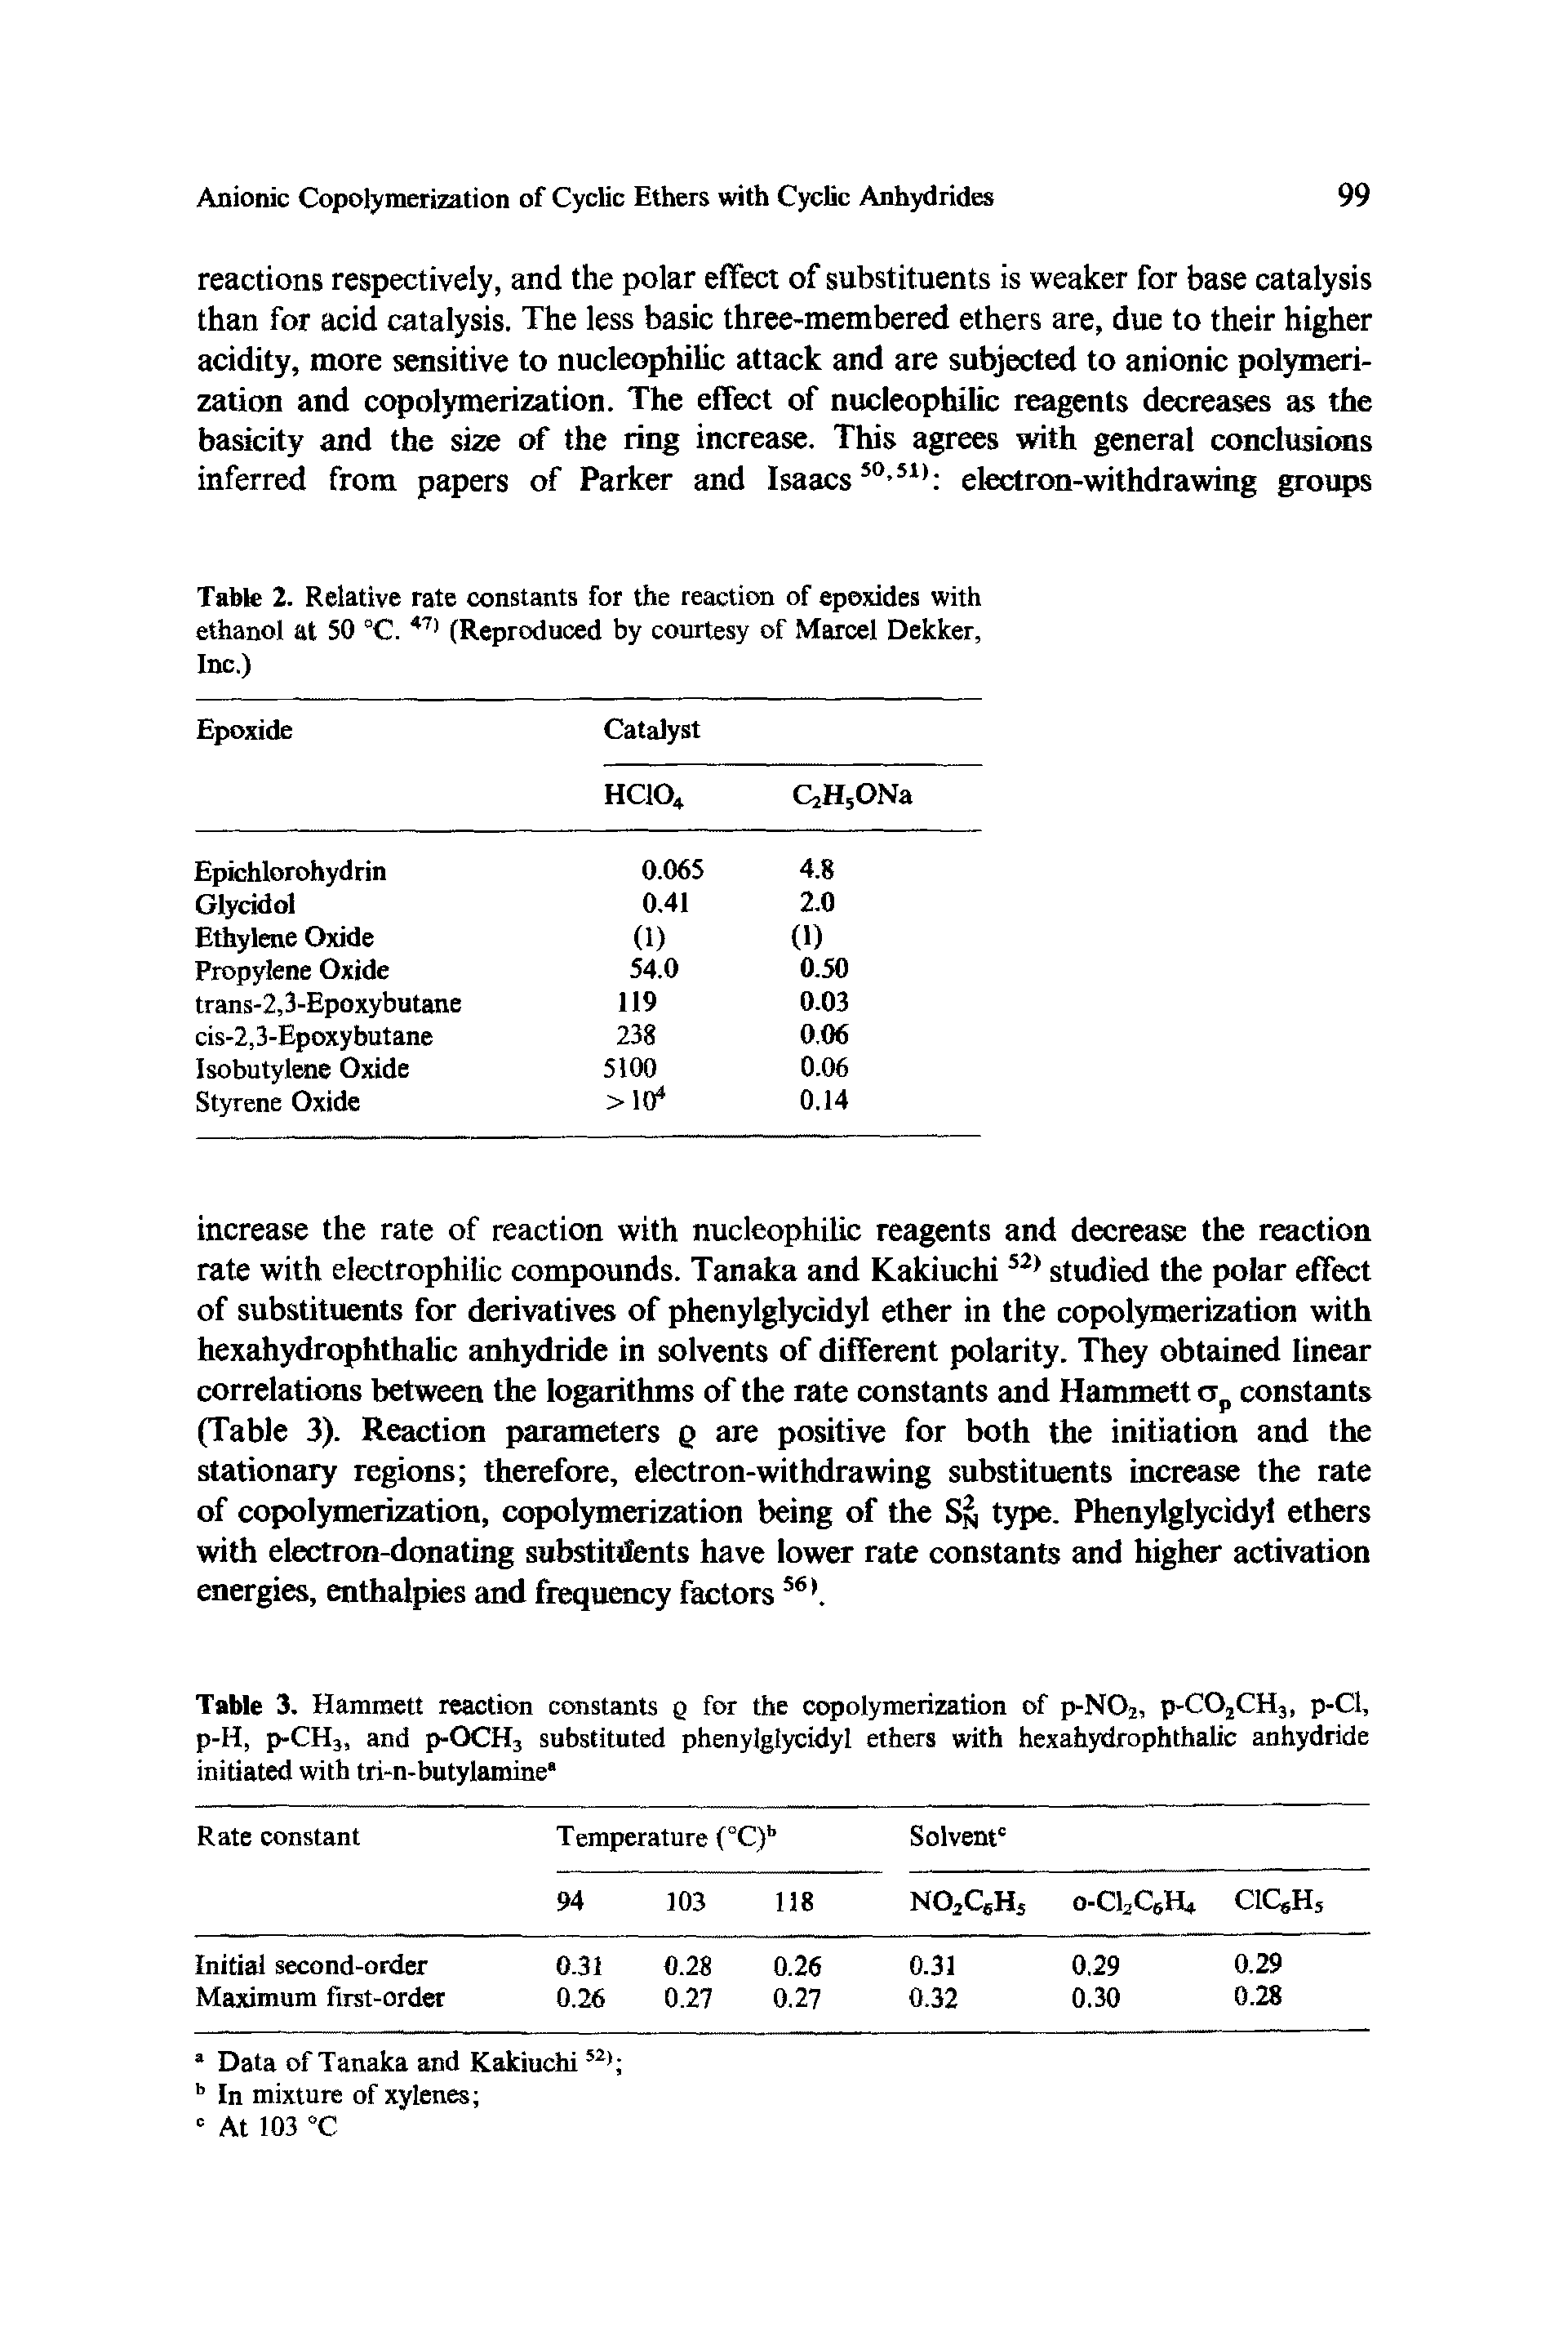 Table 3. Hammett reaction constants q for the copolymerization of p-N02, p-C02CH3, p-Cl, p-H, p-CHj, and p-OCH3 substituted phenylglycidyl ethers with hexahydrophthalic anhydride initiated with tri-n-butylamine ...